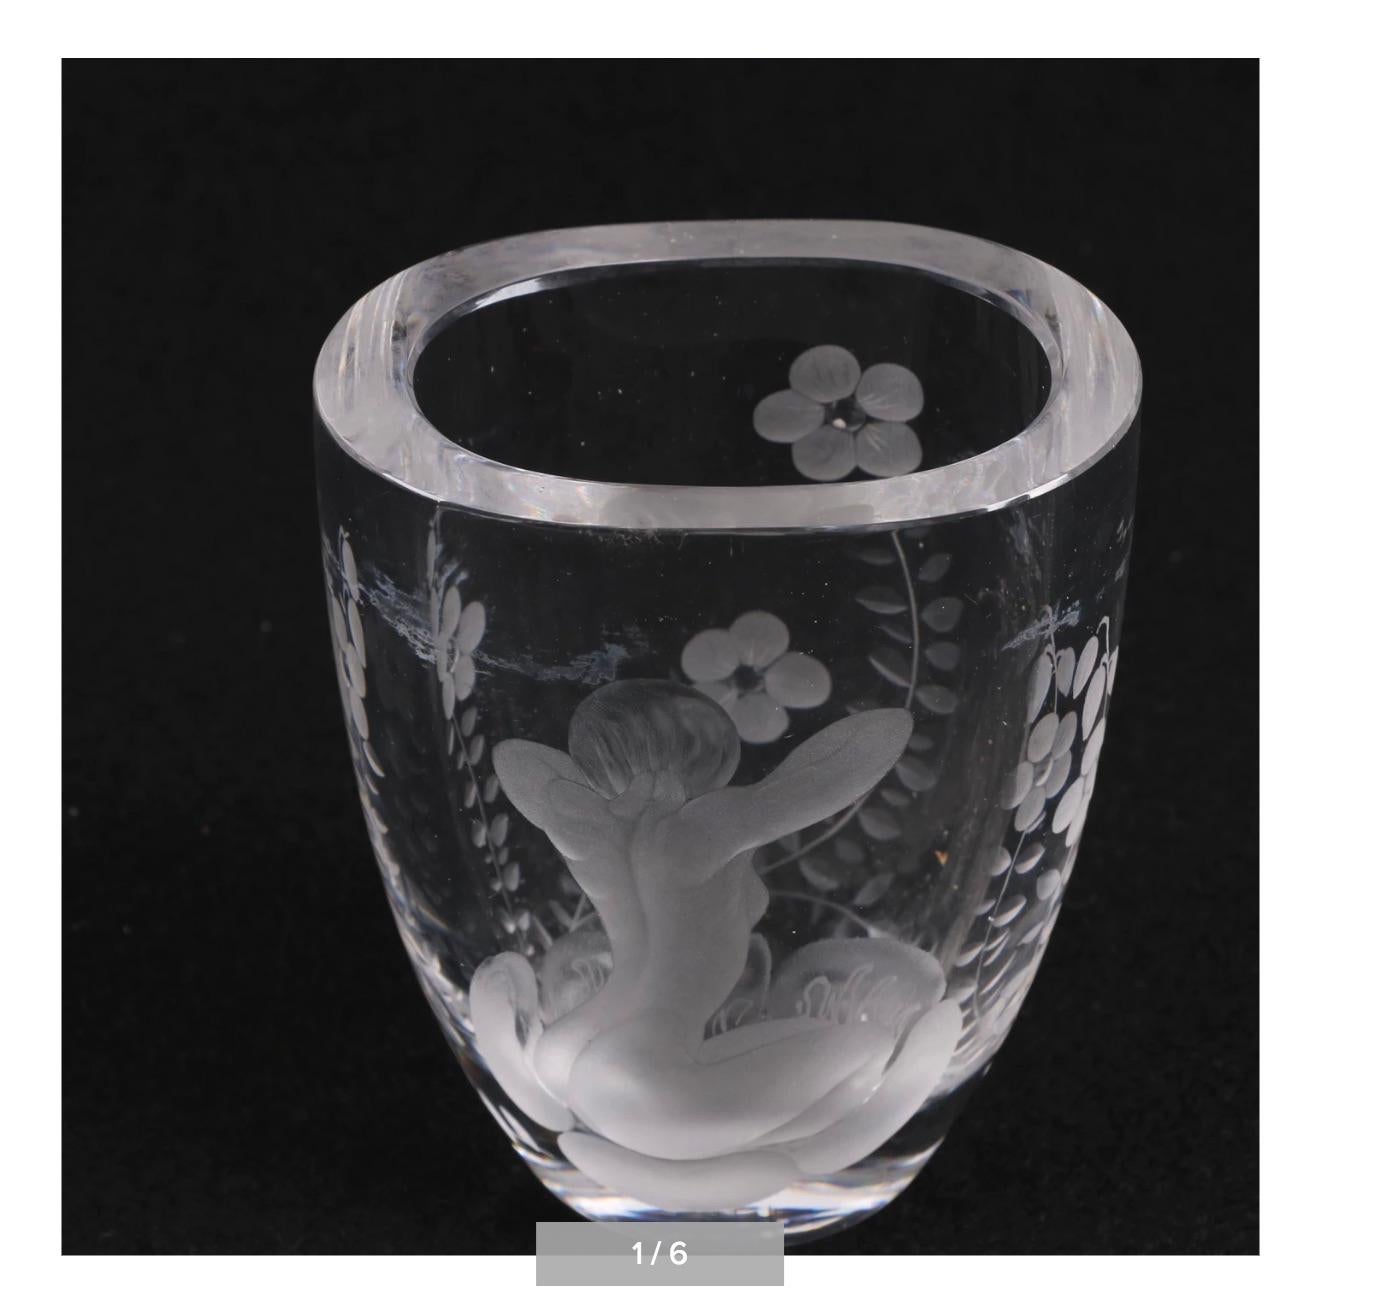 A circa 1920s sumptuous Lars Kjellander Swedish engraved glass vase. 
The substantial weighty vase features a thick, flat rim, a tapered ovoid body, and oval base. 
The piece is gorgeously embellished with floral and foliate patterns throughout, and